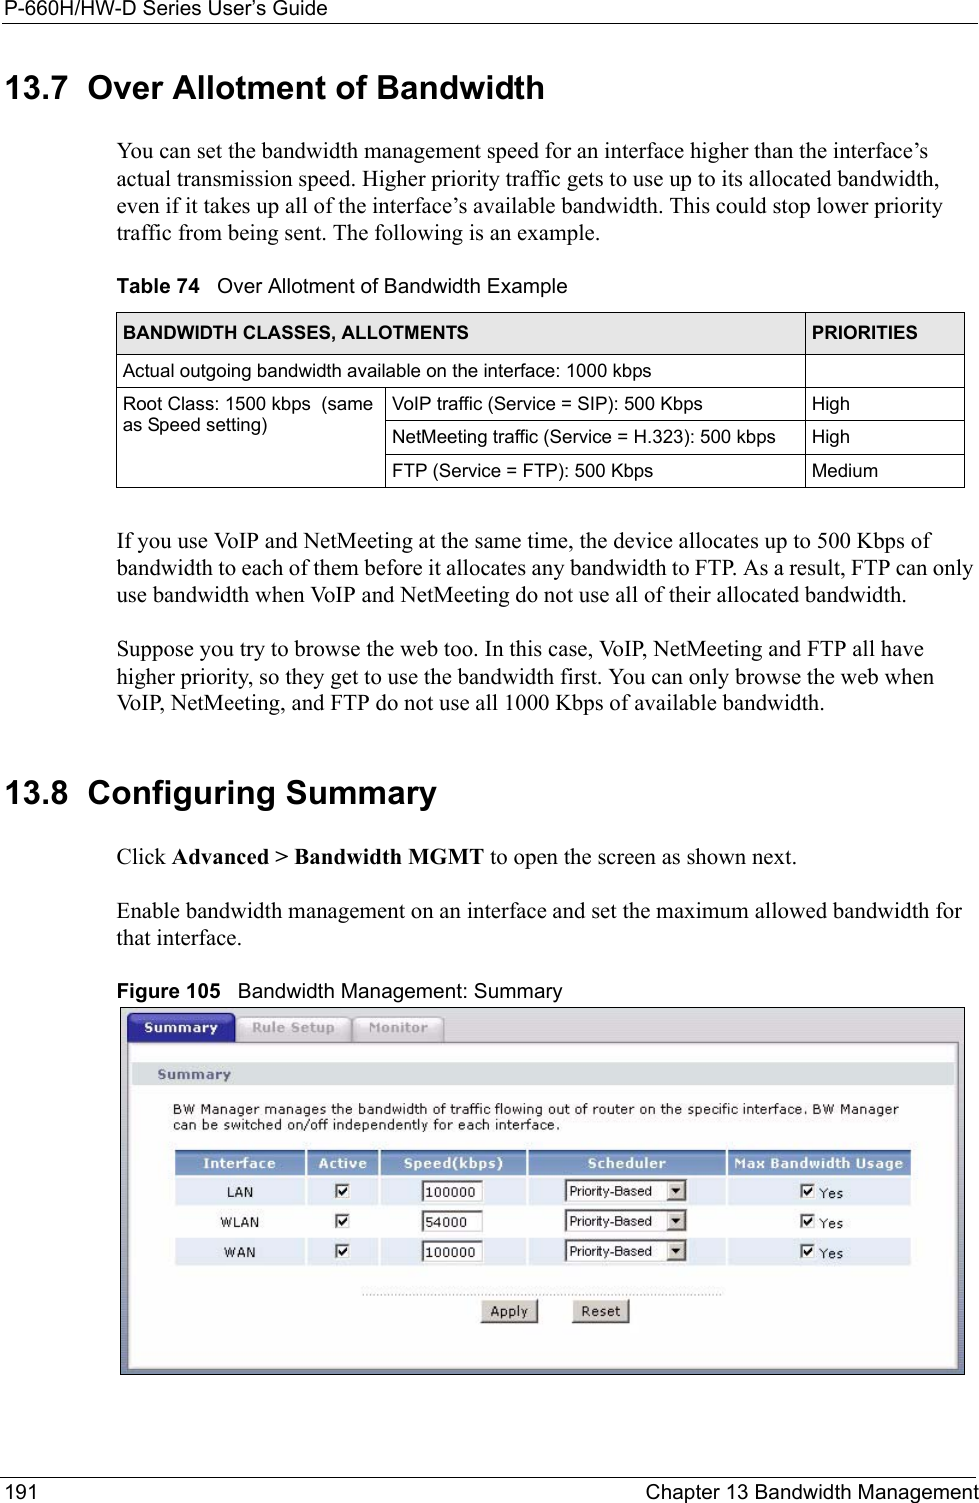 P-660H/HW-D Series User’s Guide191 Chapter 13 Bandwidth Management13.7  Over Allotment of BandwidthYou can set the bandwidth management speed for an interface higher than the interface’s actual transmission speed. Higher priority traffic gets to use up to its allocated bandwidth, even if it takes up all of the interface’s available bandwidth. This could stop lower priority traffic from being sent. The following is an example.If you use VoIP and NetMeeting at the same time, the device allocates up to 500 Kbps of bandwidth to each of them before it allocates any bandwidth to FTP. As a result, FTP can only use bandwidth when VoIP and NetMeeting do not use all of their allocated bandwidth.Suppose you try to browse the web too. In this case, VoIP, NetMeeting and FTP all have higher priority, so they get to use the bandwidth first. You can only browse the web when VoIP, NetMeeting, and FTP do not use all 1000 Kbps of available bandwidth.13.8  Configuring Summary Click Advanced &gt; Bandwidth MGMT to open the screen as shown next. Enable bandwidth management on an interface and set the maximum allowed bandwidth for that interface. Figure 105   Bandwidth Management: SummaryTable 74   Over Allotment of Bandwidth ExampleBANDWIDTH CLASSES, ALLOTMENTS PRIORITIESActual outgoing bandwidth available on the interface: 1000 kbpsRoot Class: 1500 kbps  (same as Speed setting)VoIP traffic (Service = SIP): 500 Kbps HighNetMeeting traffic (Service = H.323): 500 kbps HighFTP (Service = FTP): 500 Kbps Medium